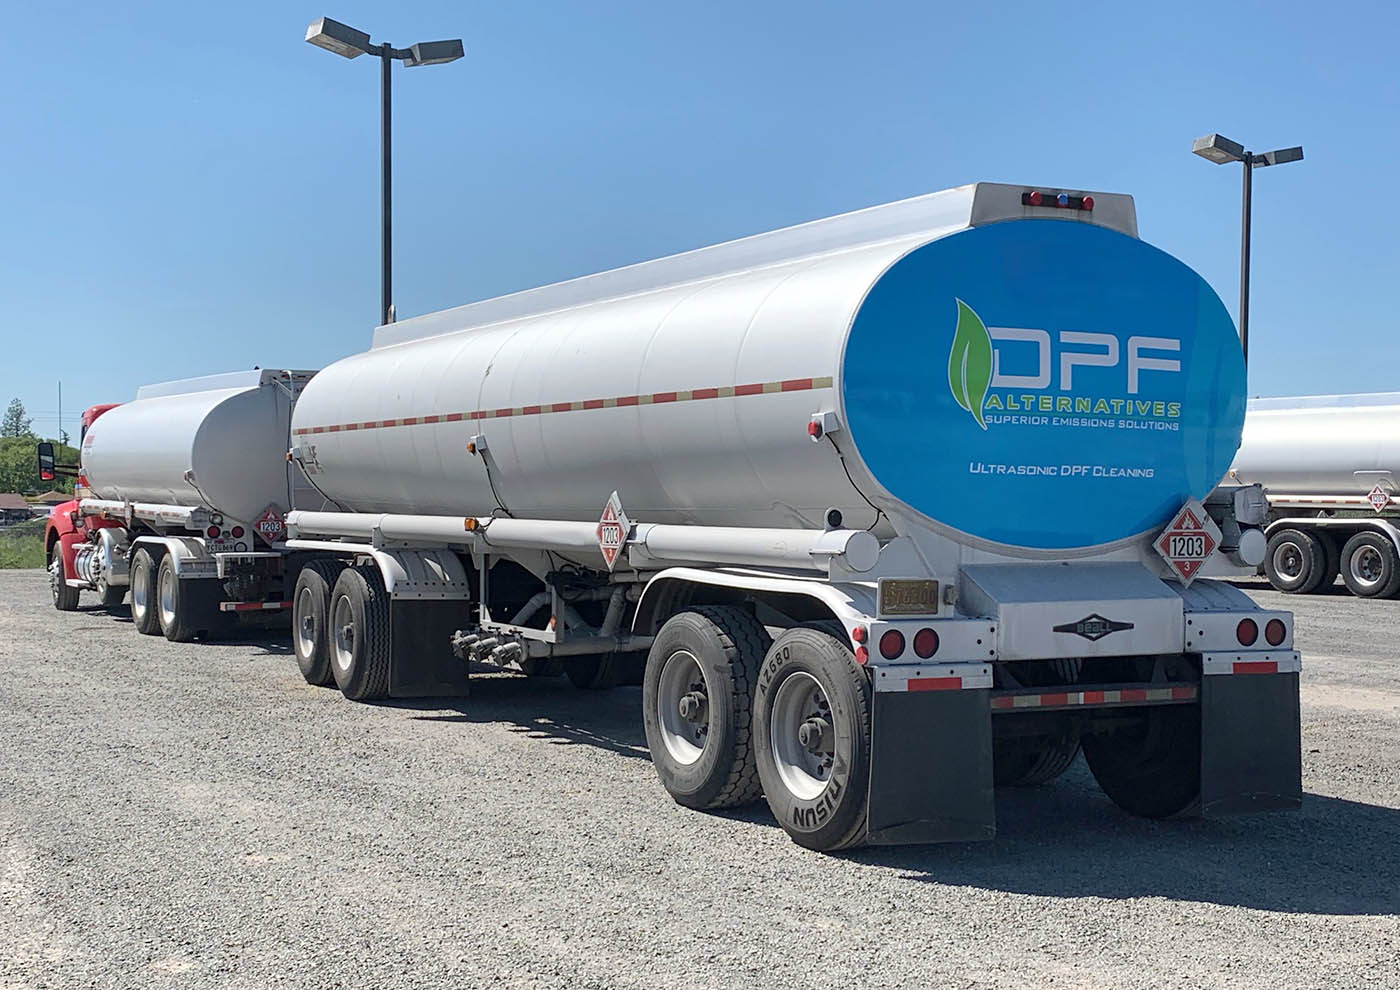 Back of a clean, large, reflective semi truck rig, contact DPF Alternatives for a DPF cleaning in Amarillo / Pampa.